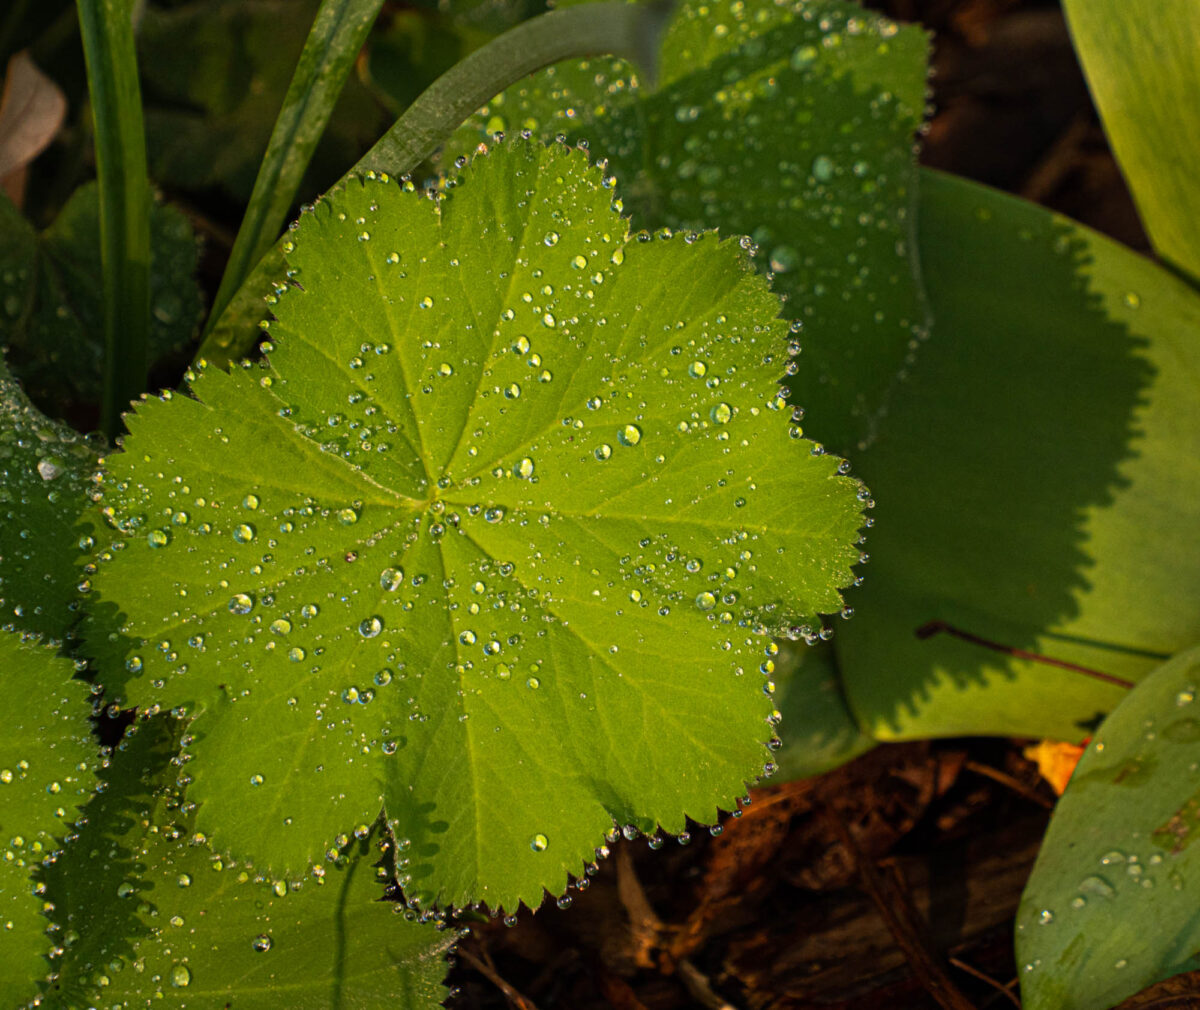 Leaf with drops of water surrounding it.